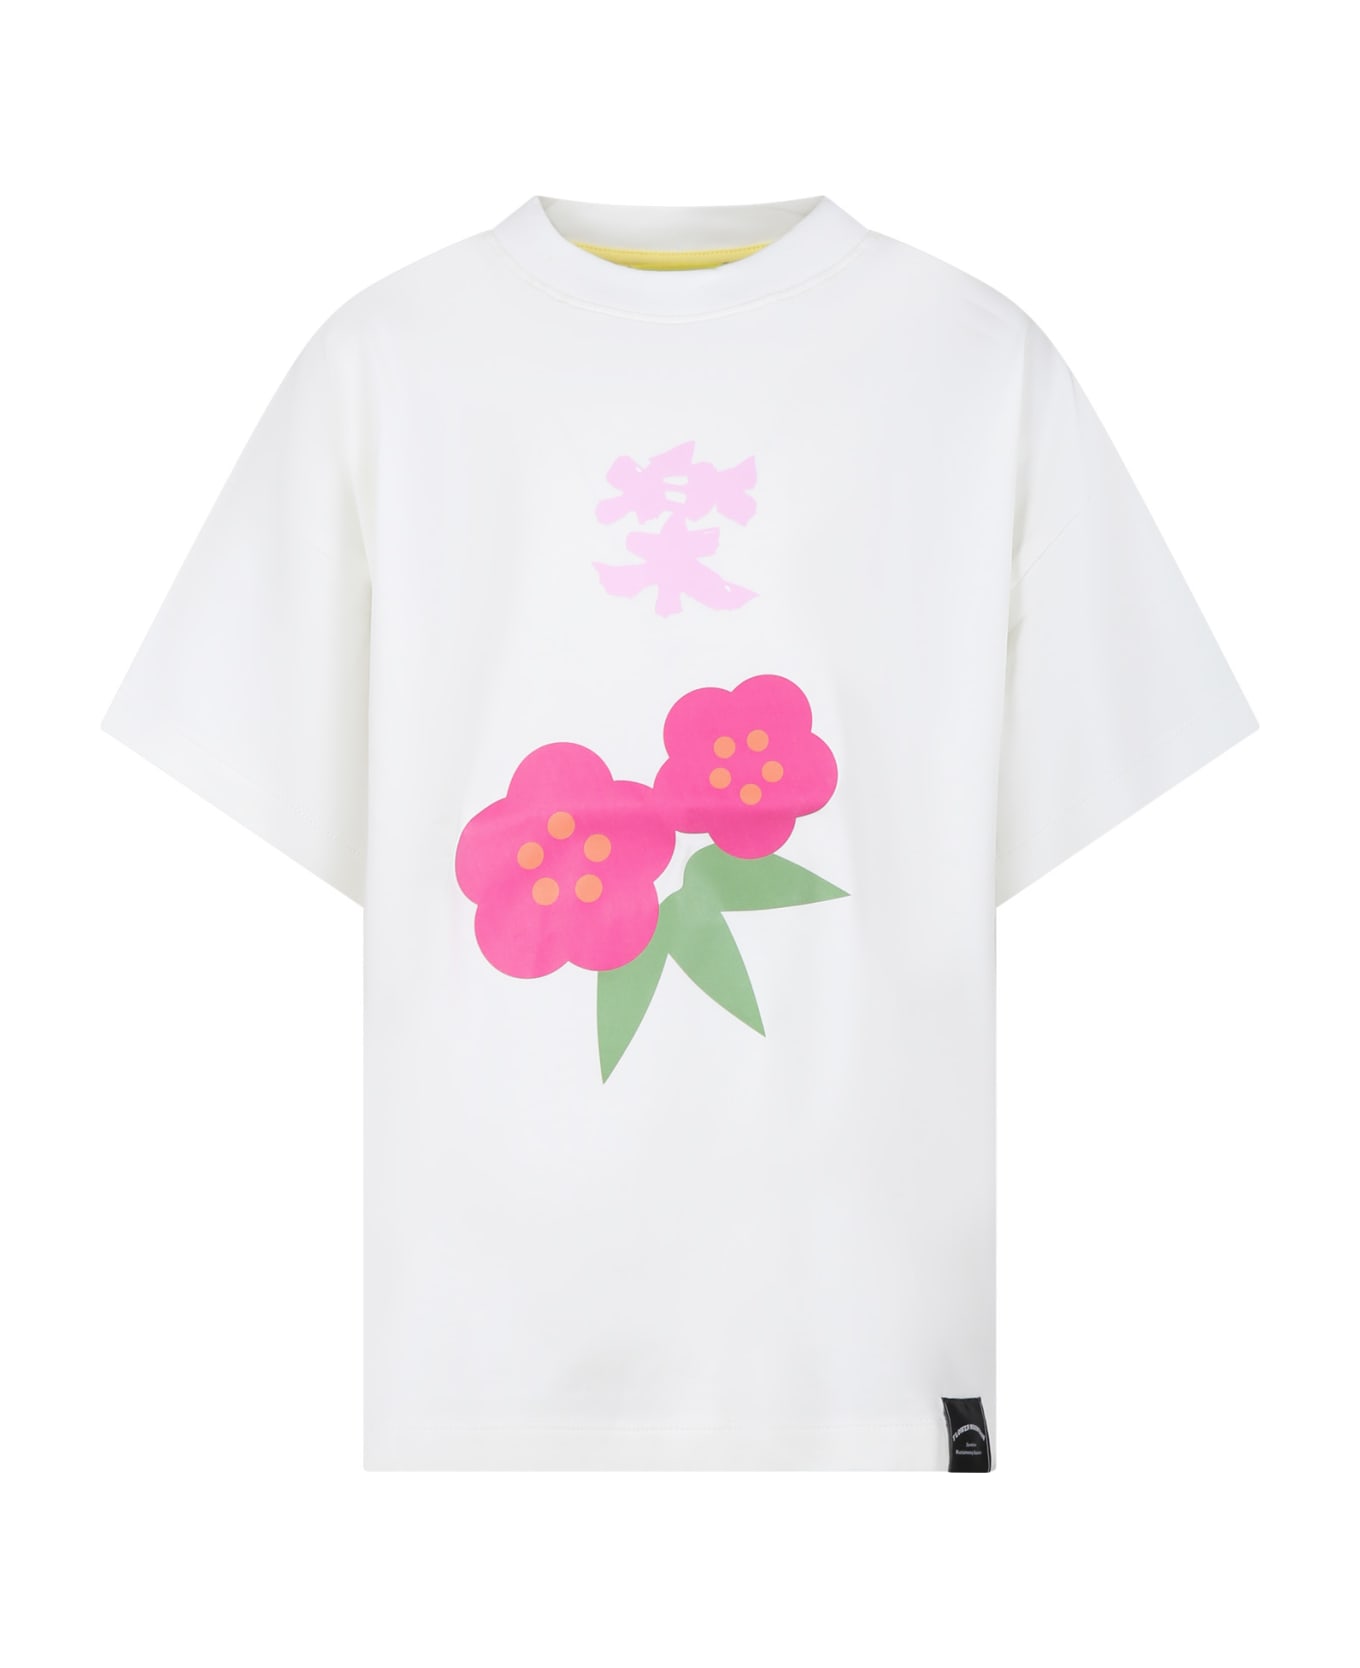 Flower Mountain White T-shirt For Girl With Flowers - White